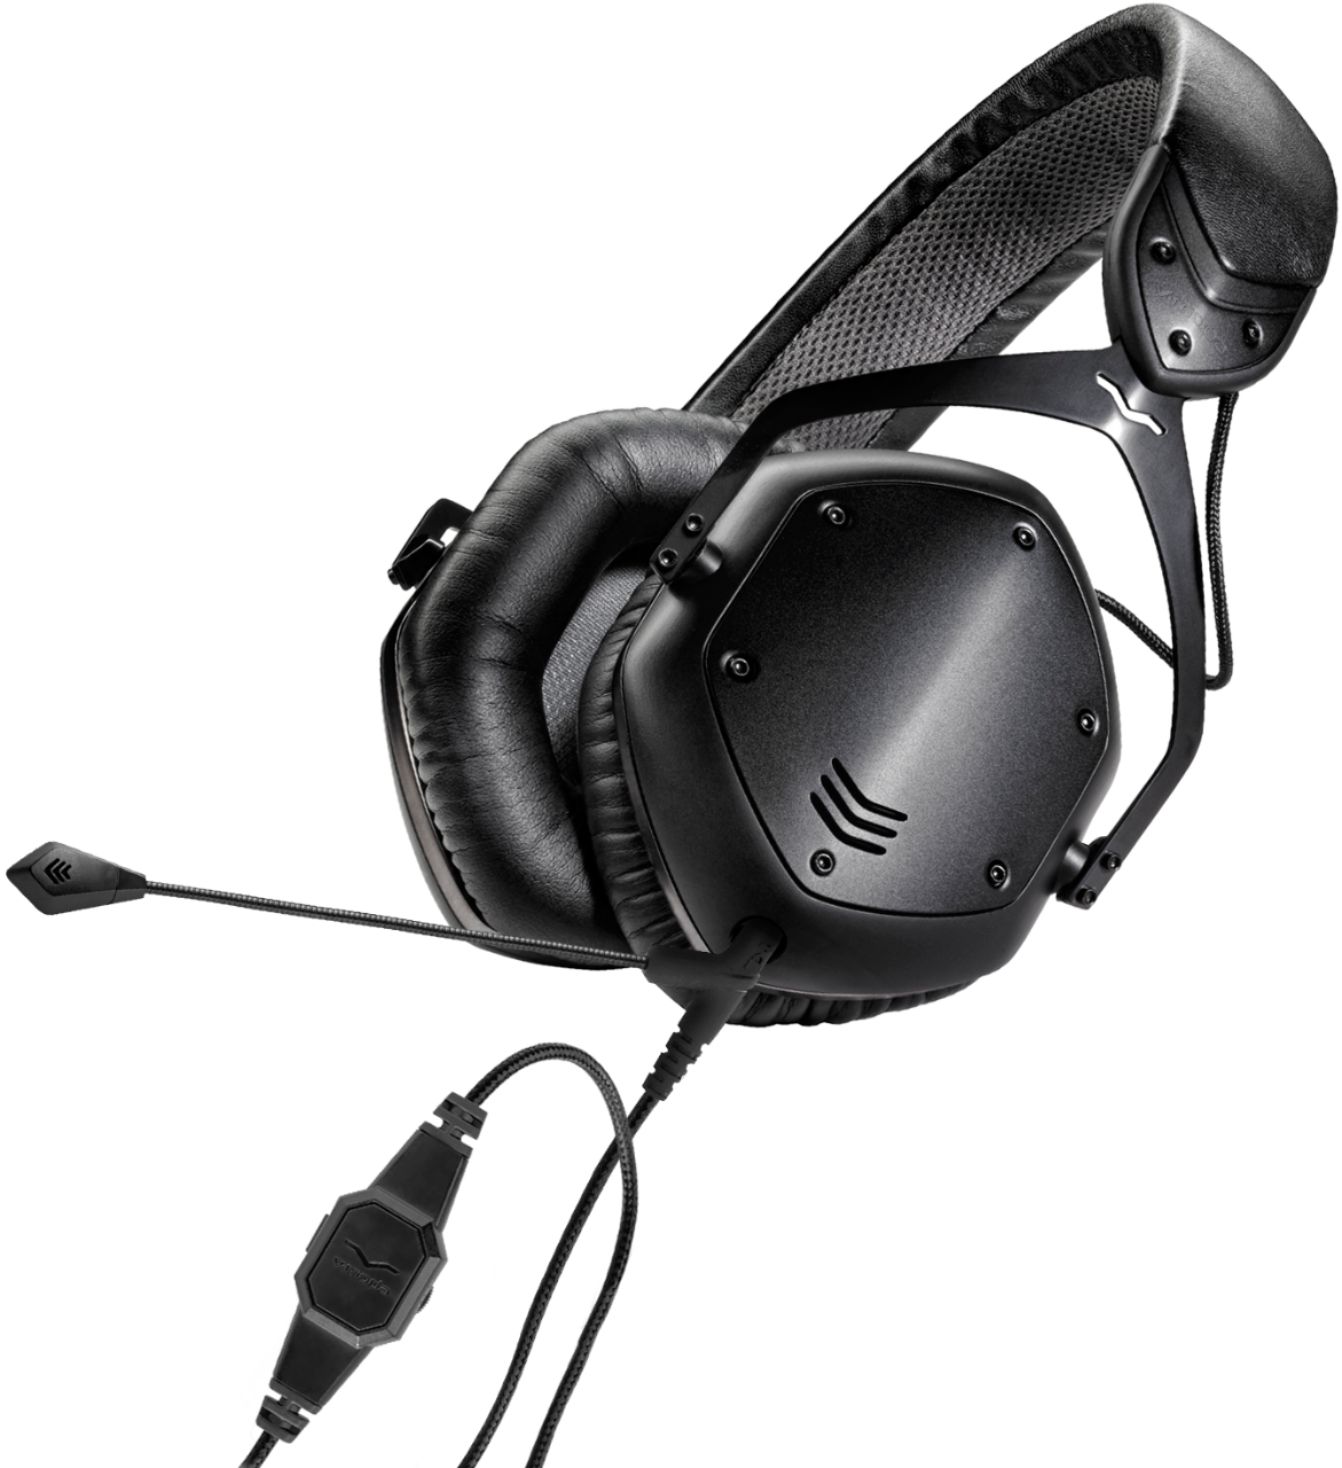 nitrogen undersøgelse Se internettet Best Buy: V-MODA Crossfade LP2 Wired Stereo Gaming Headset for PlayStation  4, Xbox One, PC and Mobile Devices Black BBY-G-LP2